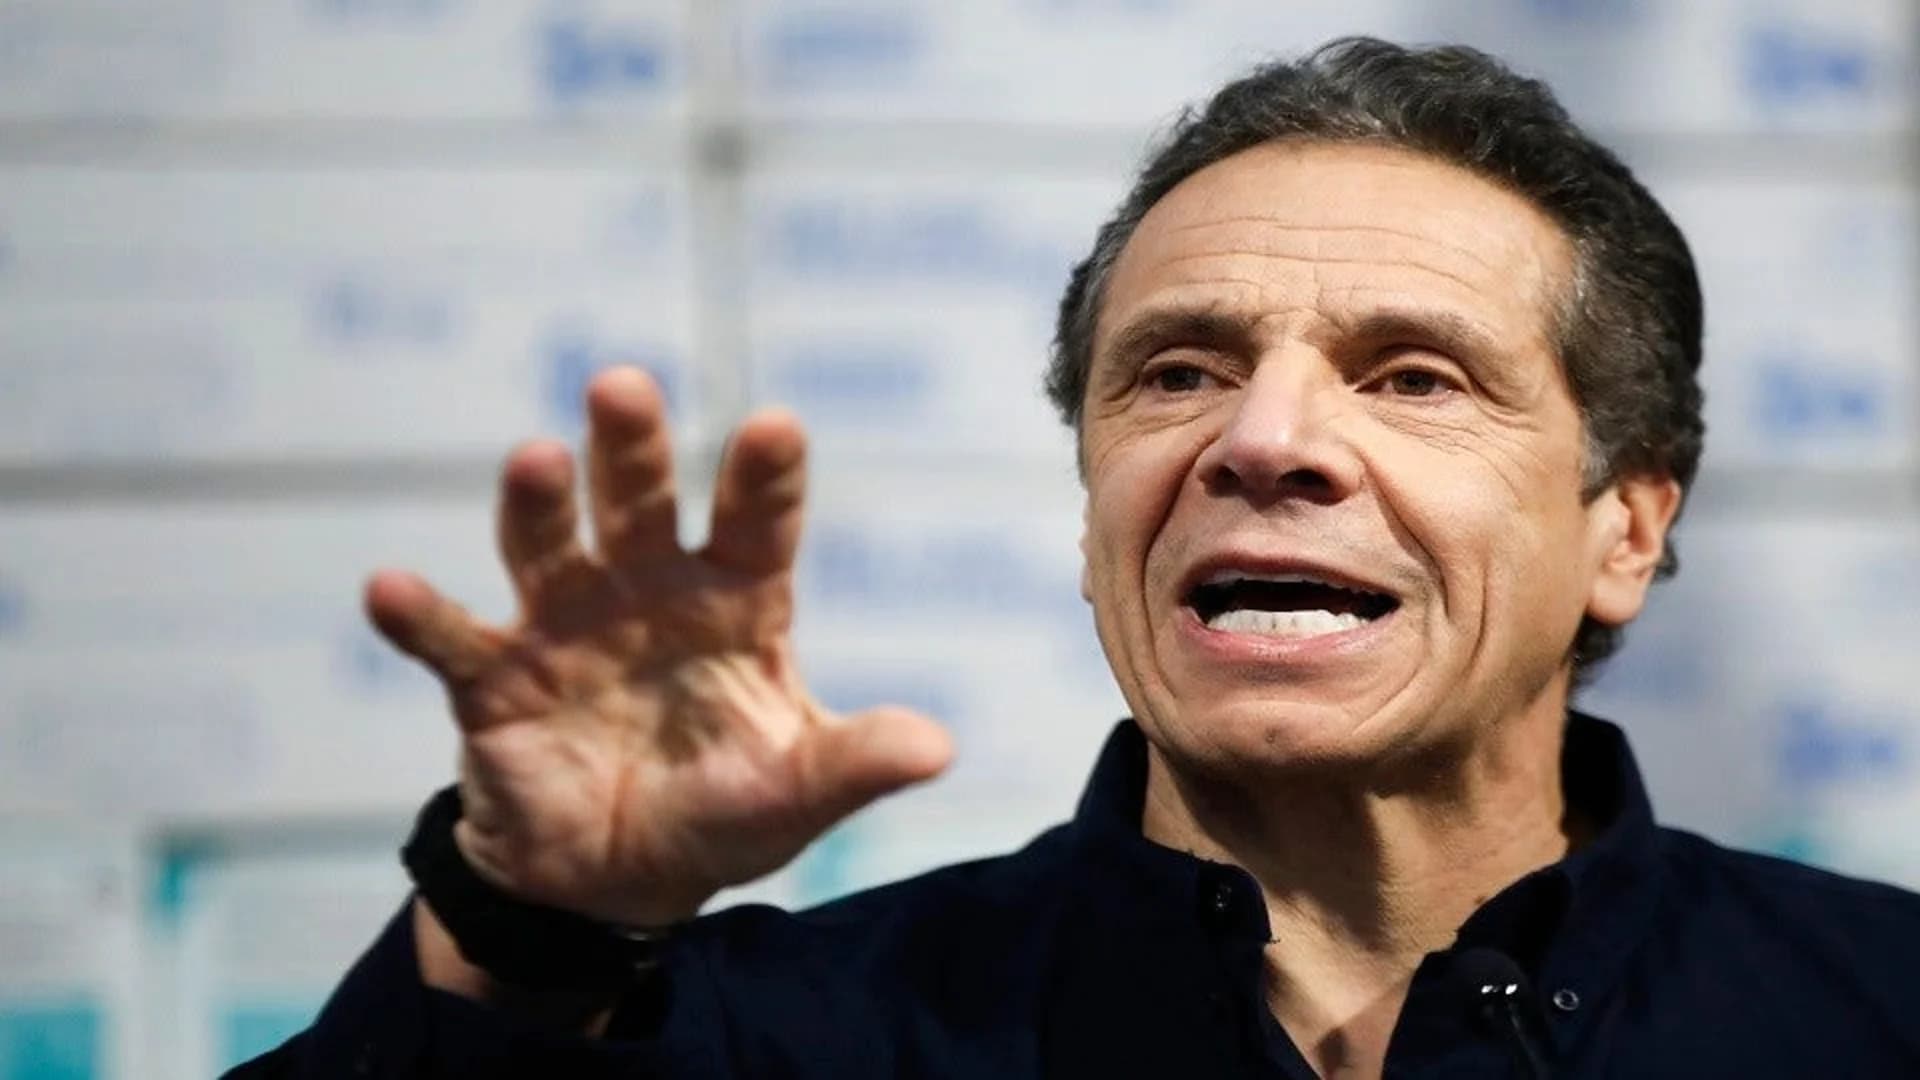 Gov. Cuomo takes over governors group as virus batters states